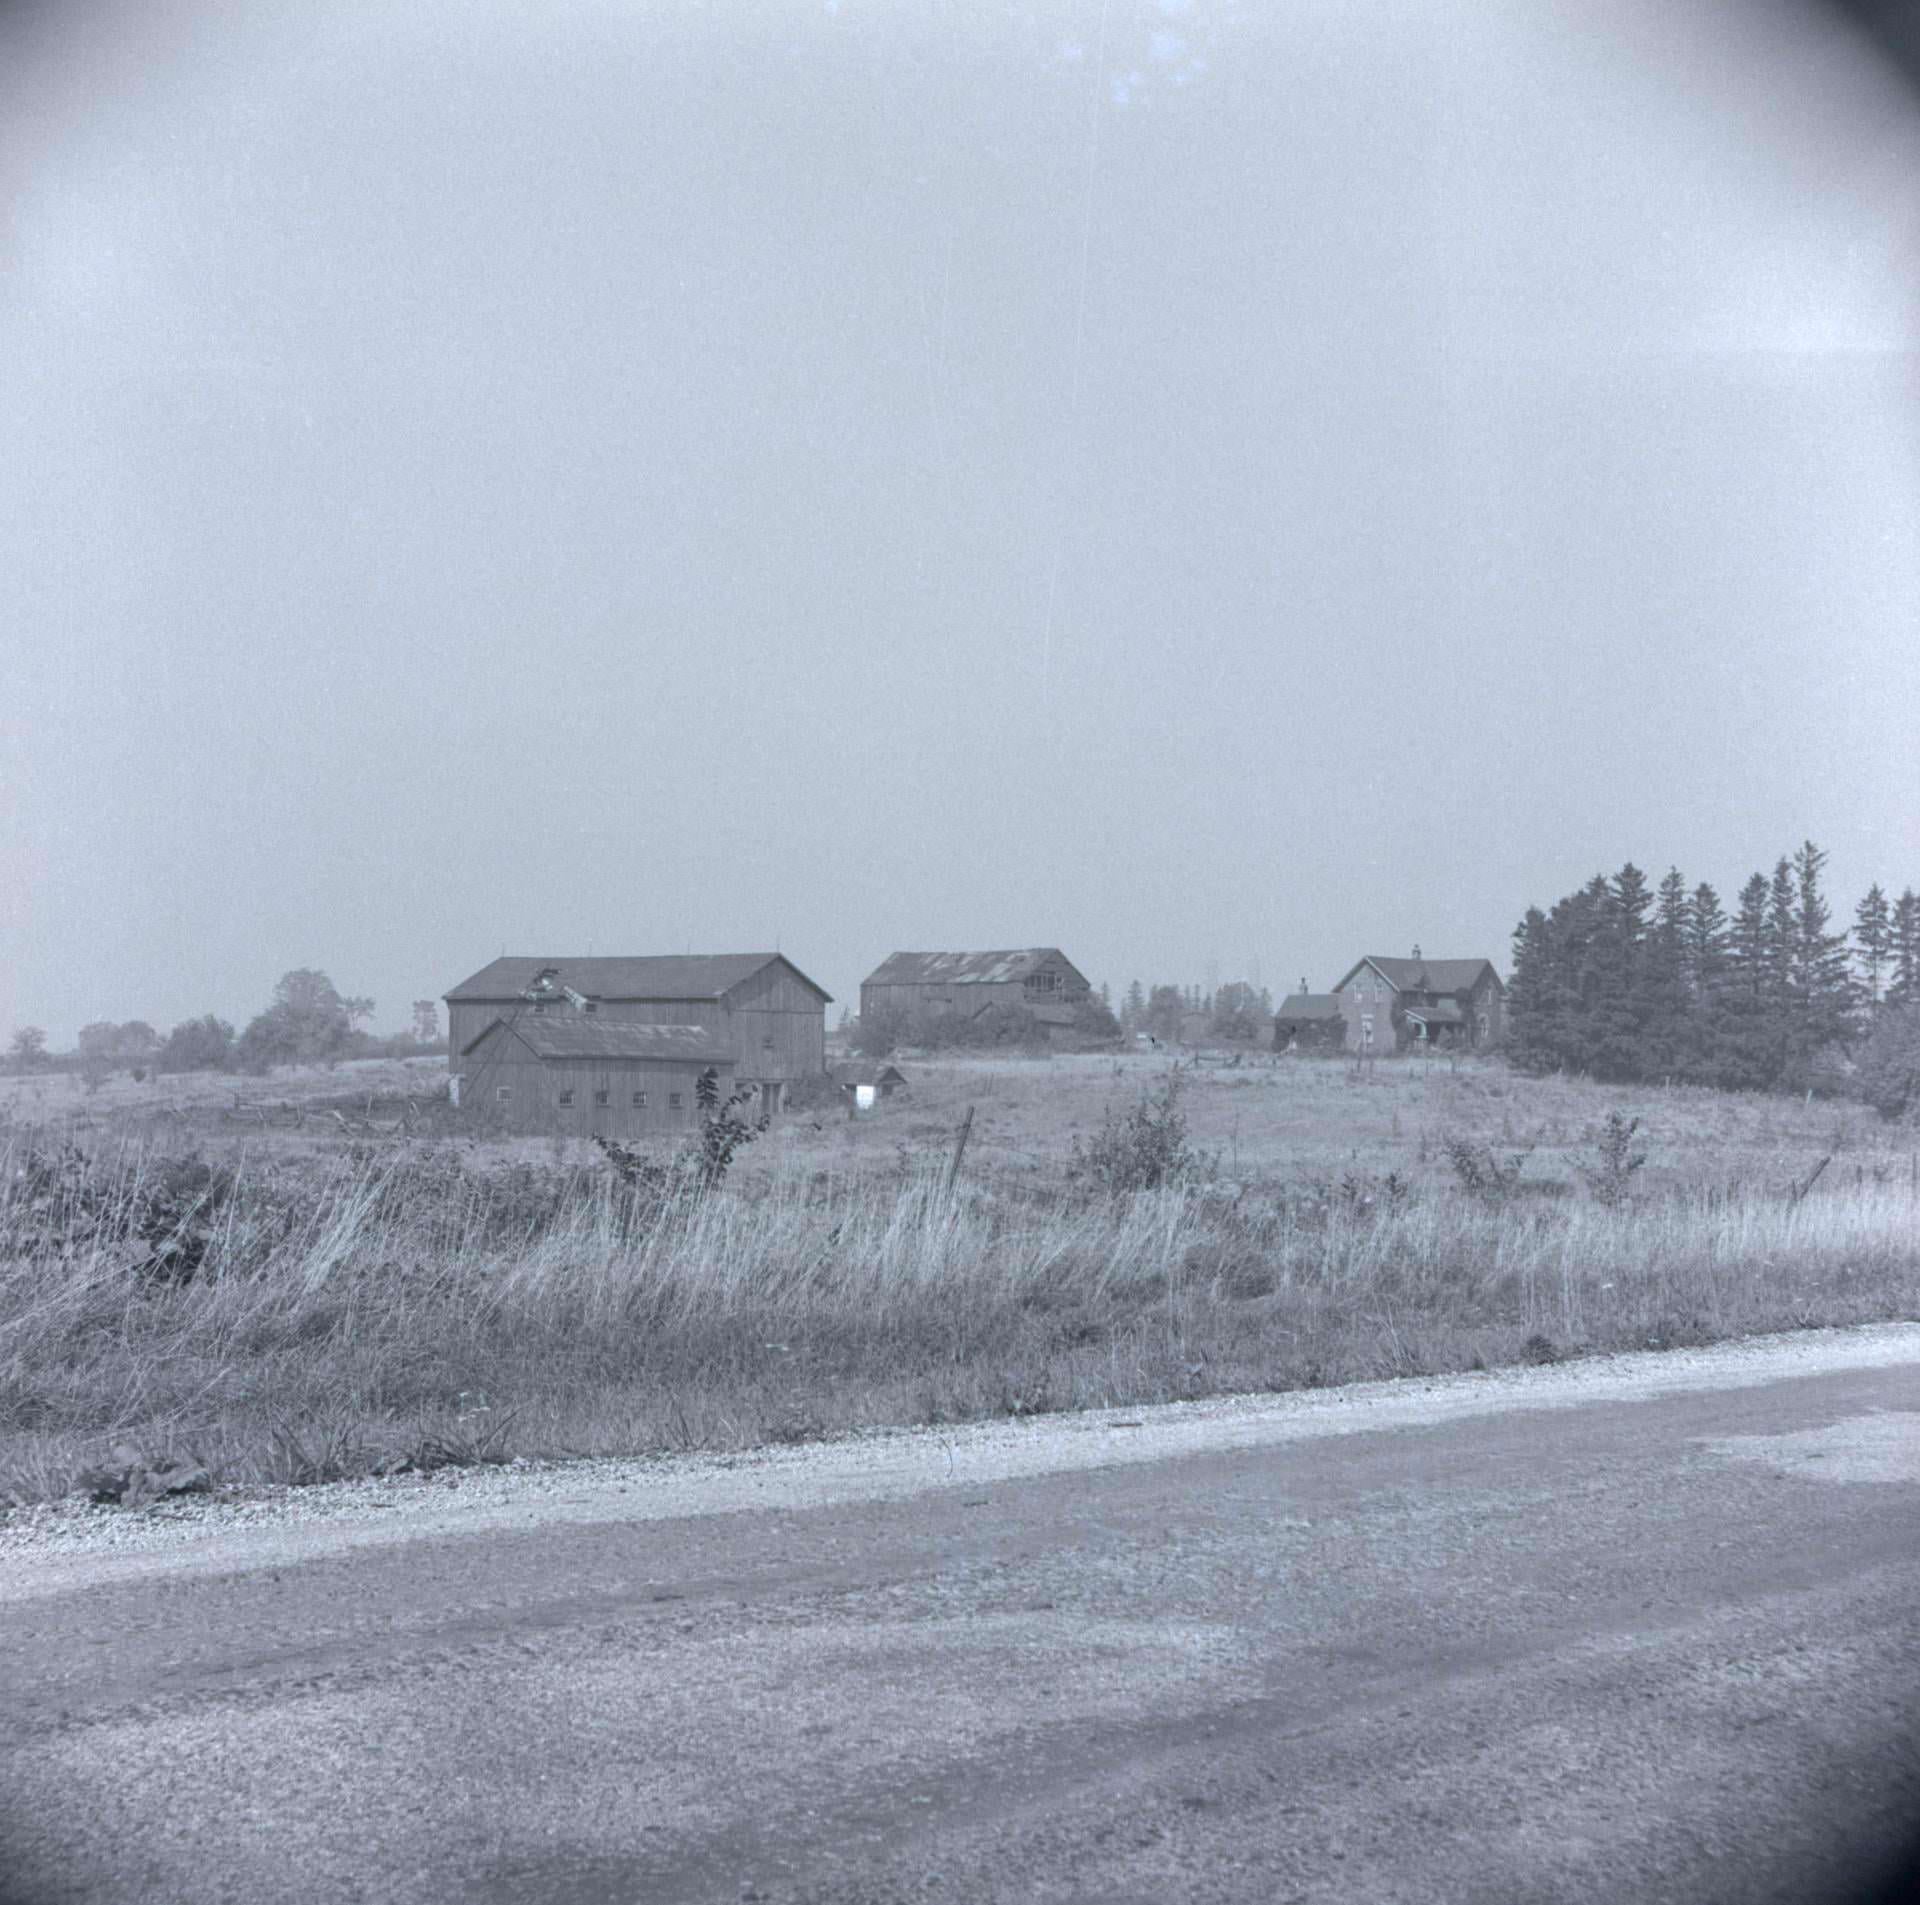 Victoria Park Avenue, looking northwest to the farm of Arthur Hill, southwest corner of Victoria Park Avenue and Old Finch Avenue, 1955